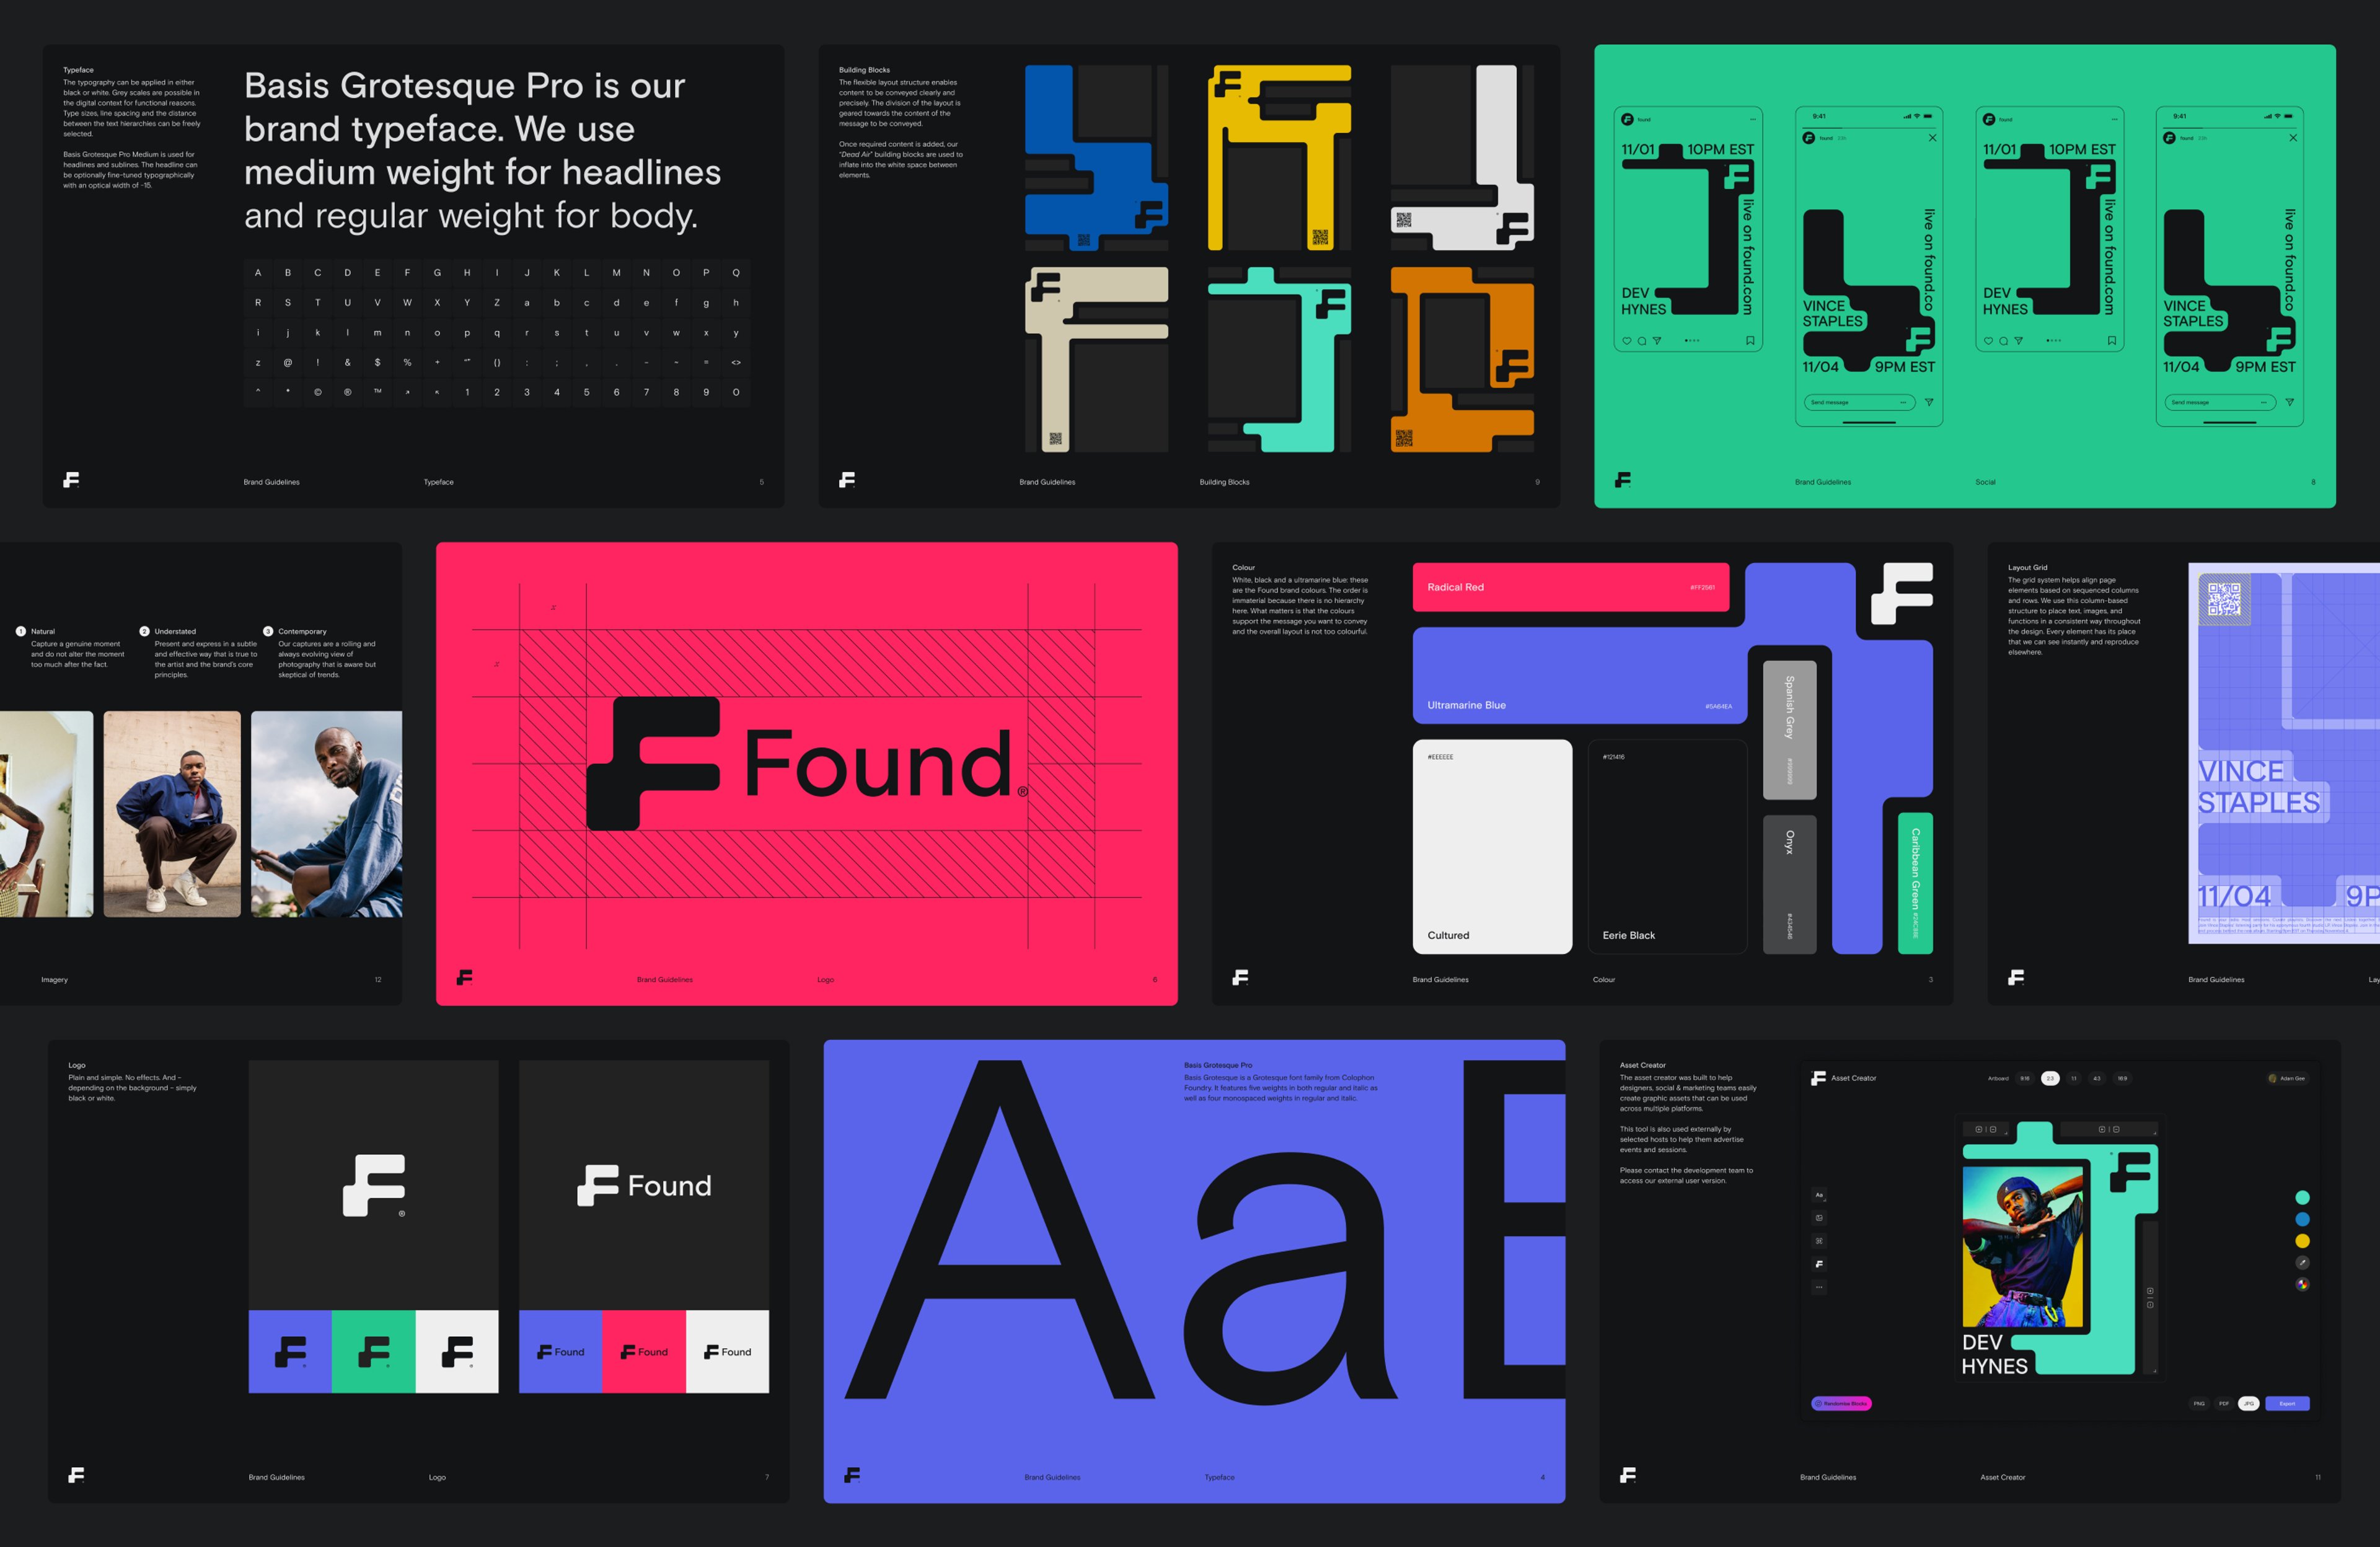 Various slides from the Found branding guidelines